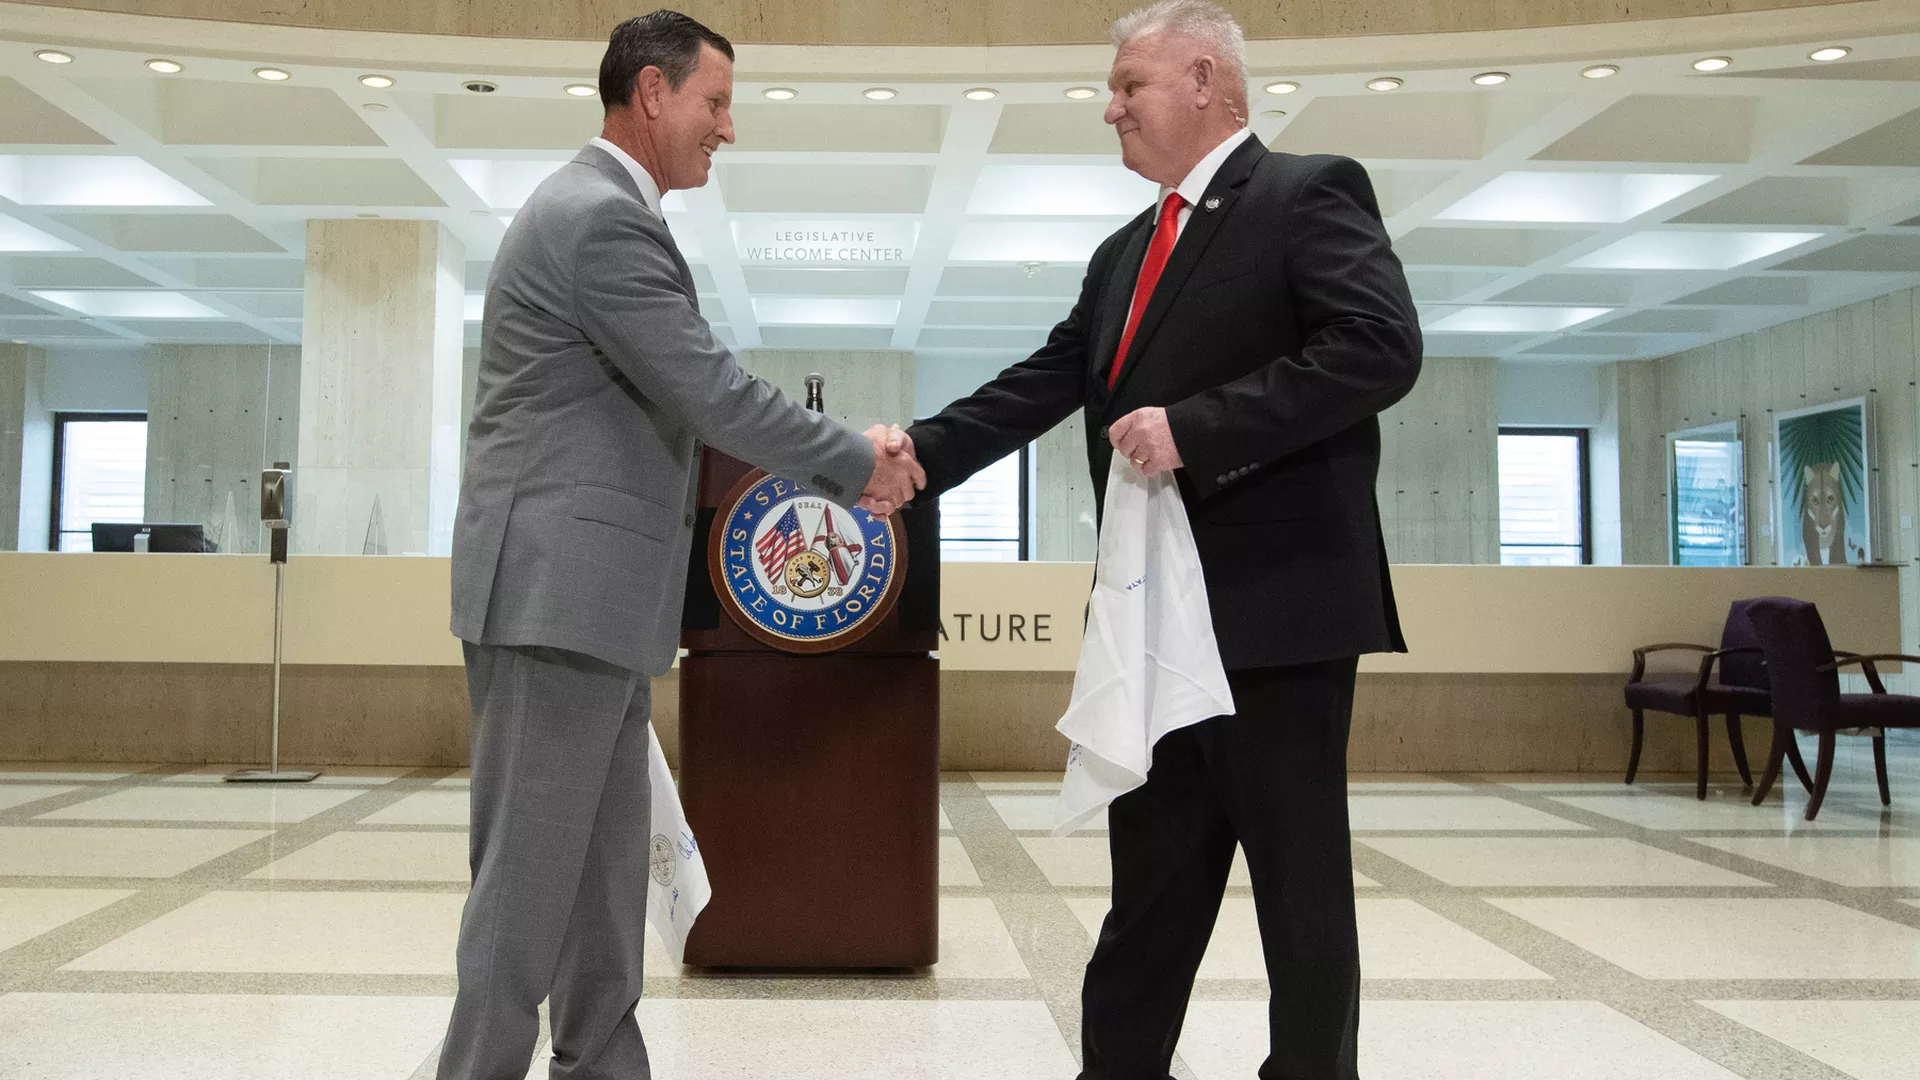 Two men in suits shake hands while holding white handkerchiefs 